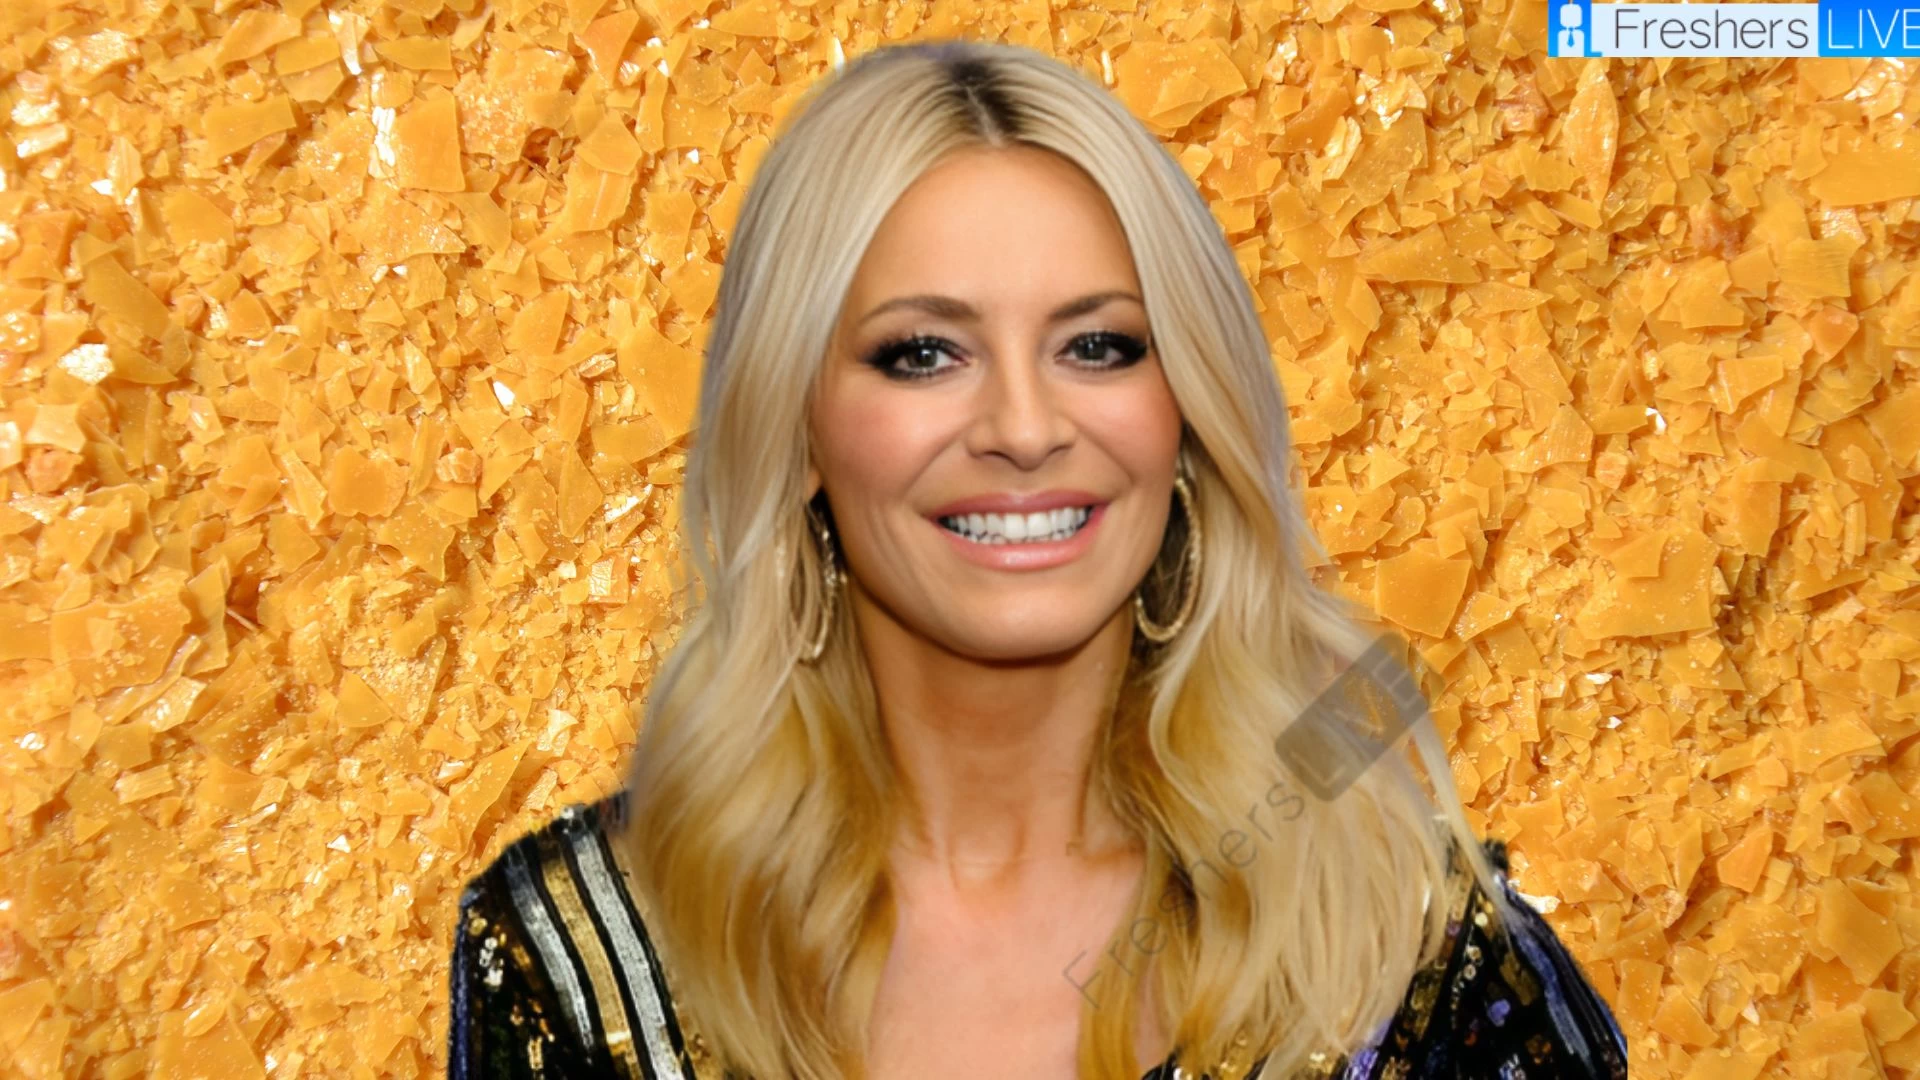 Tess Daly Ethnicity, What is Tess Daly's Ethnicity?